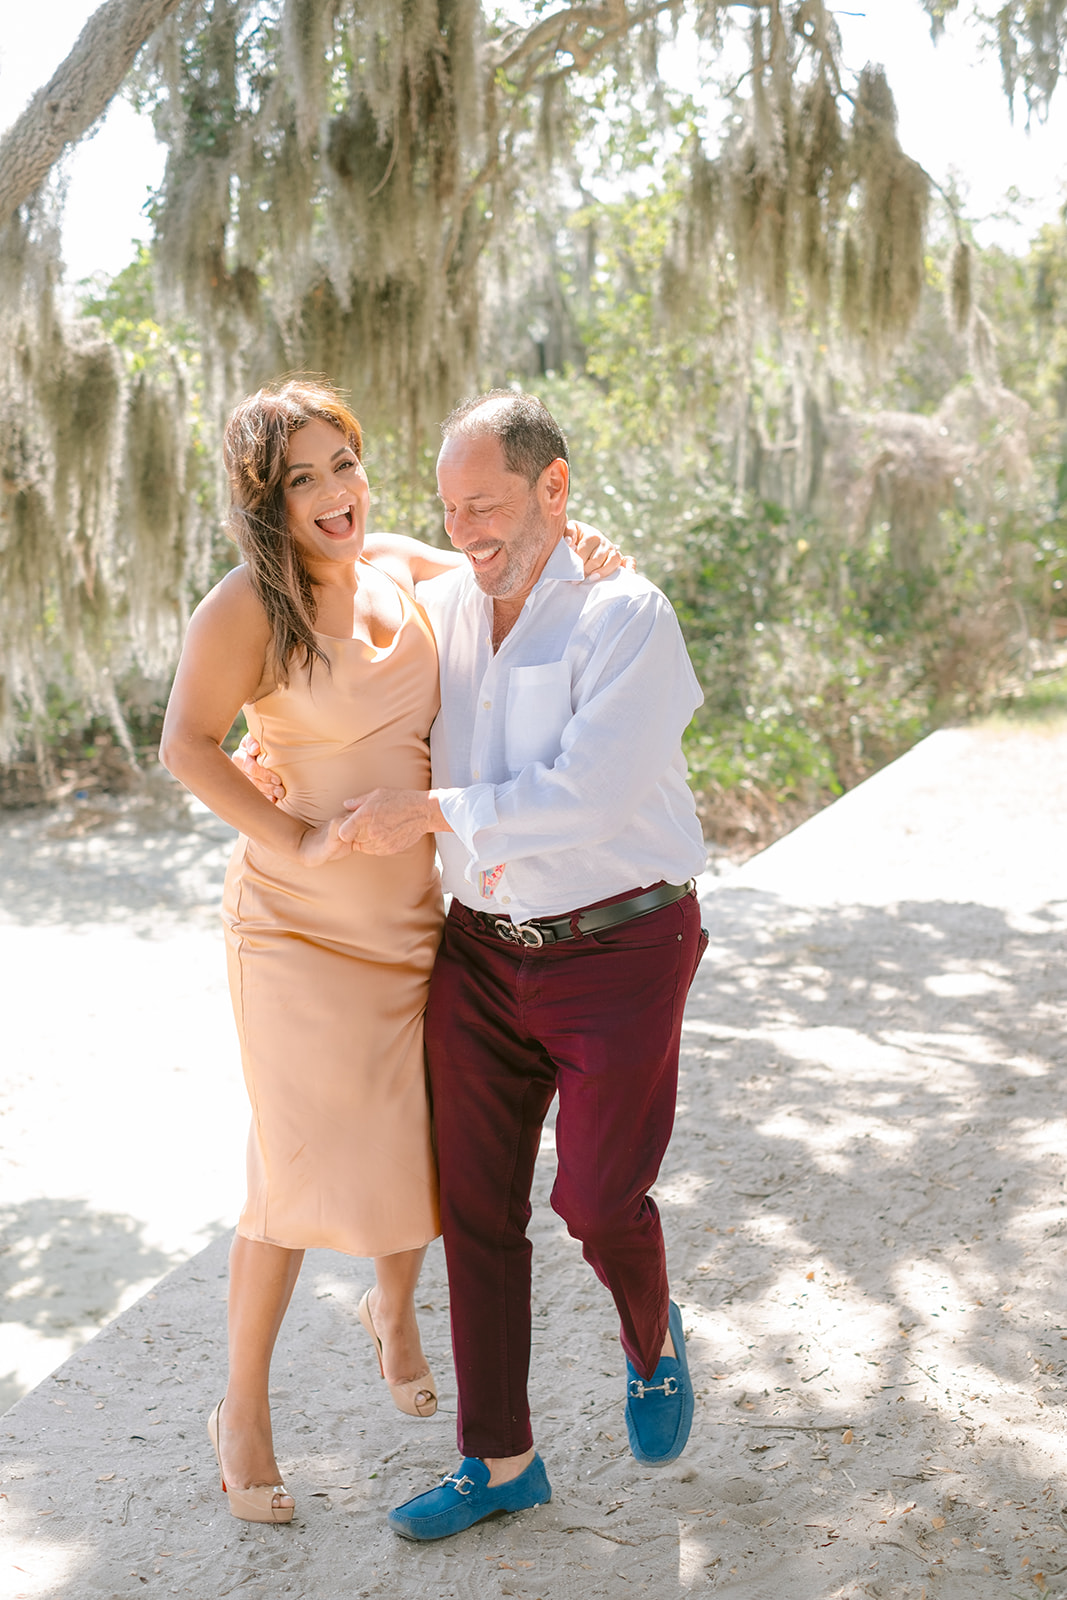 Playful Tampa Engagement Session
